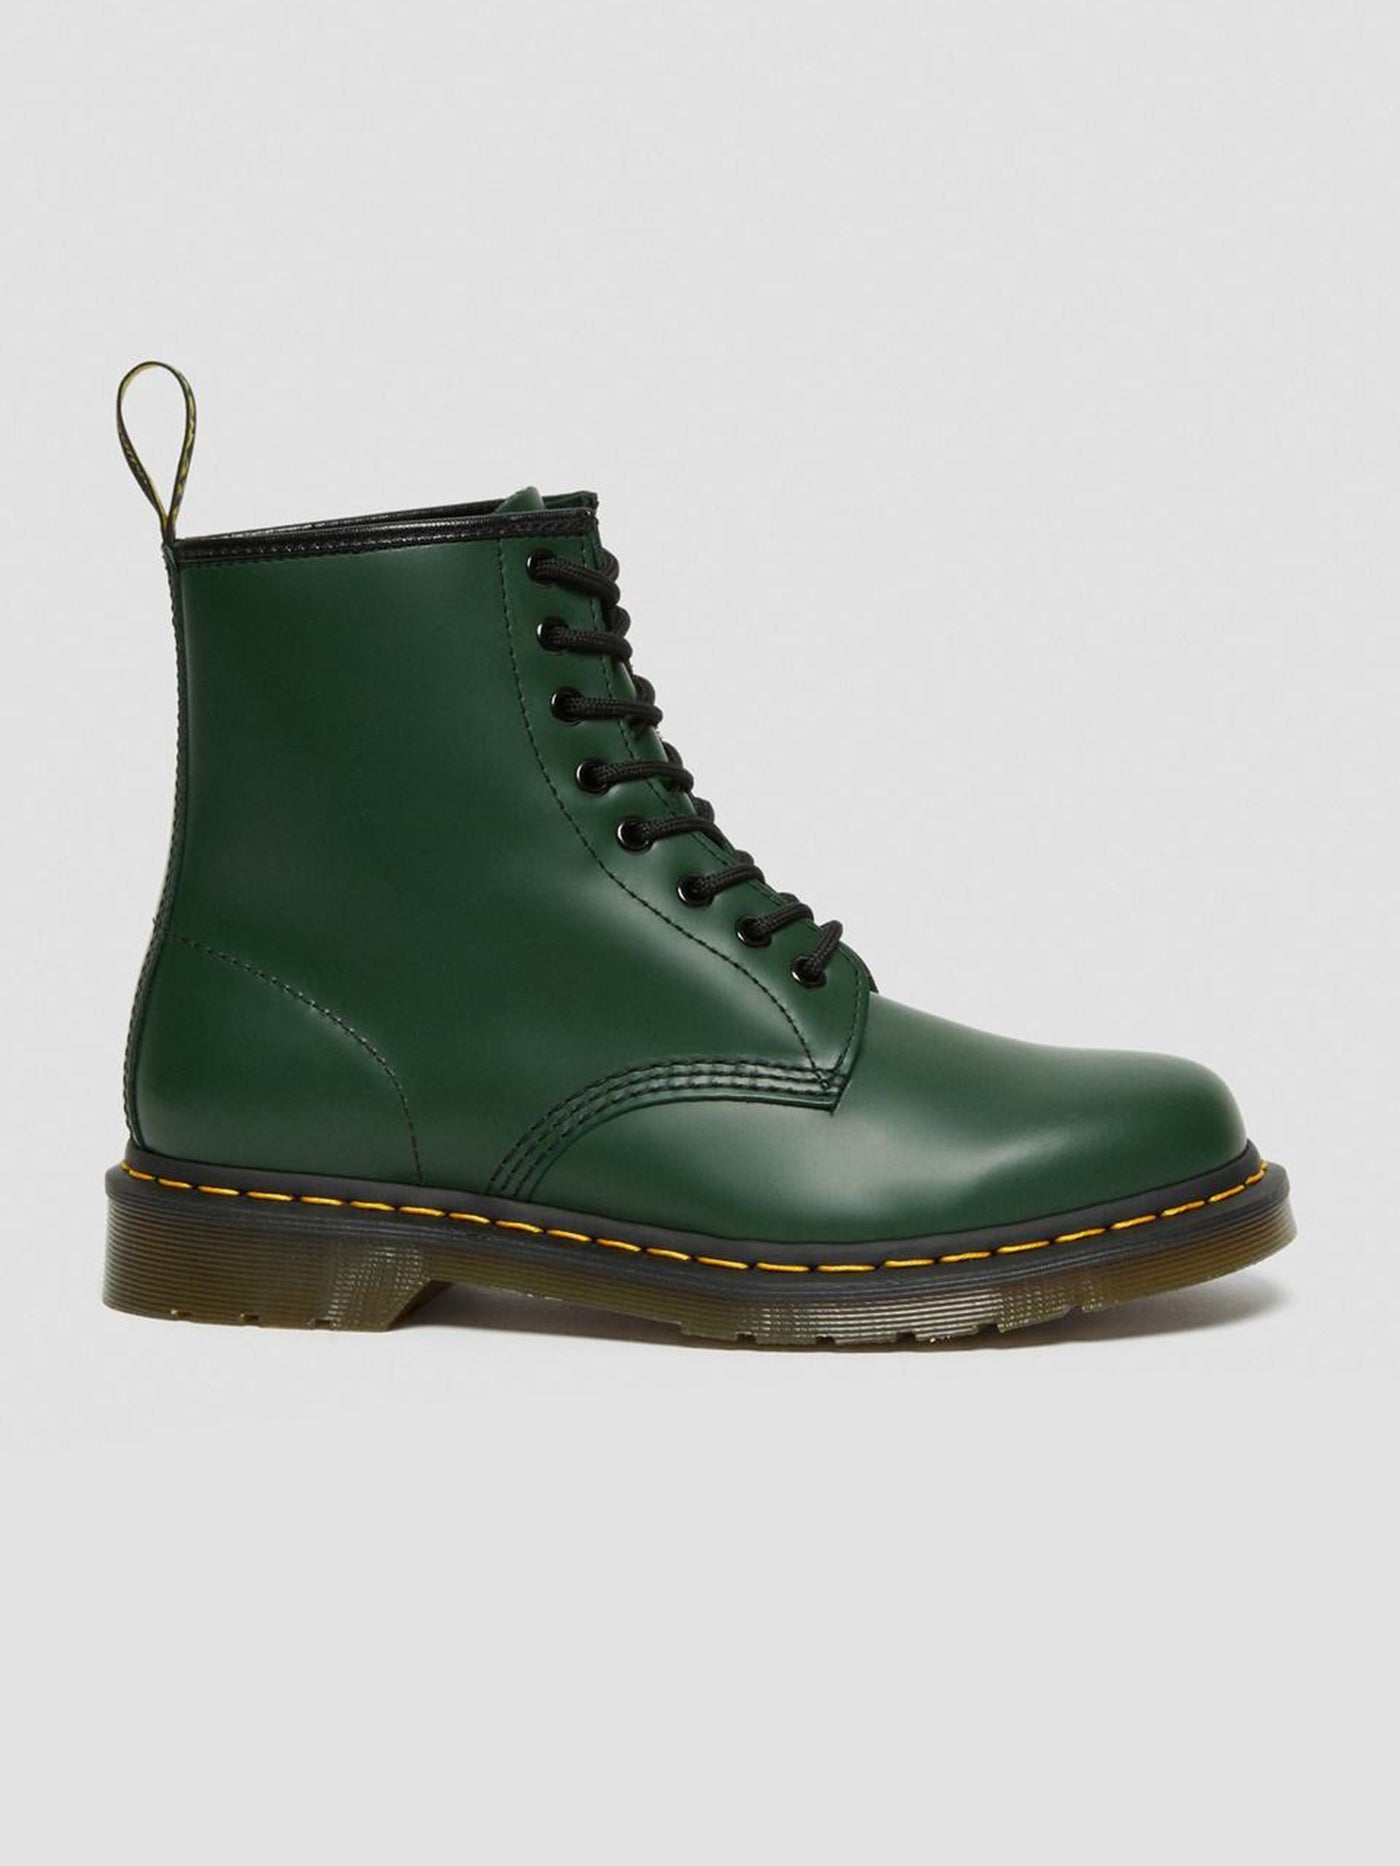 Dr. Martens 1460 Smooth Green Boots | EMPIRE